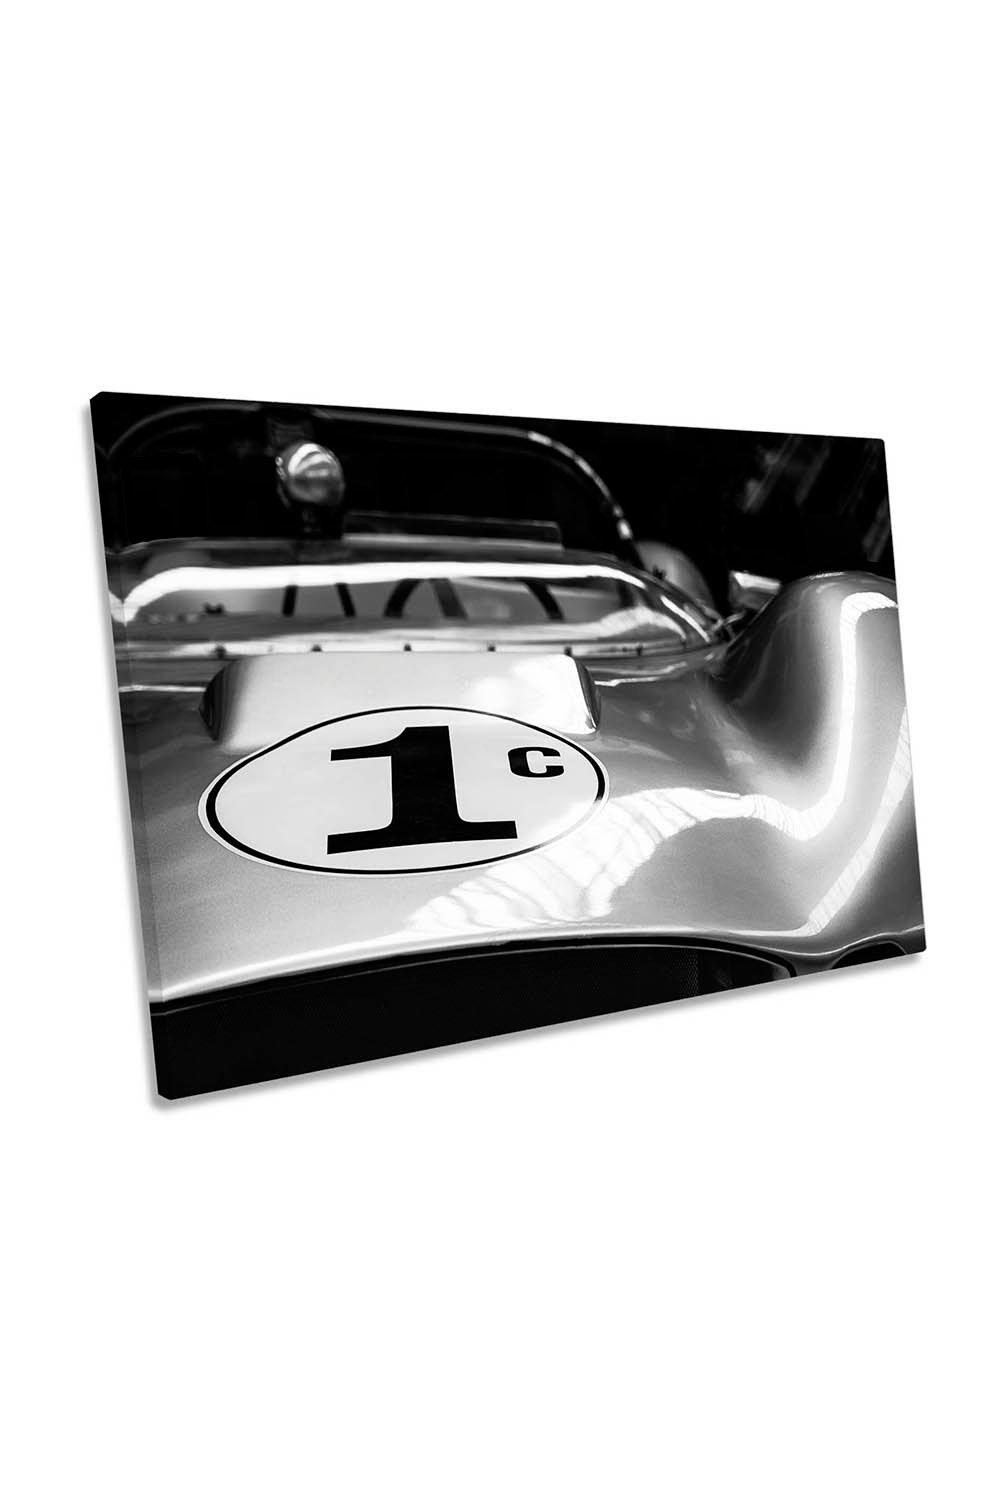 1c Classic Race Car Motor Sports Canvas Wall Art Picture Print